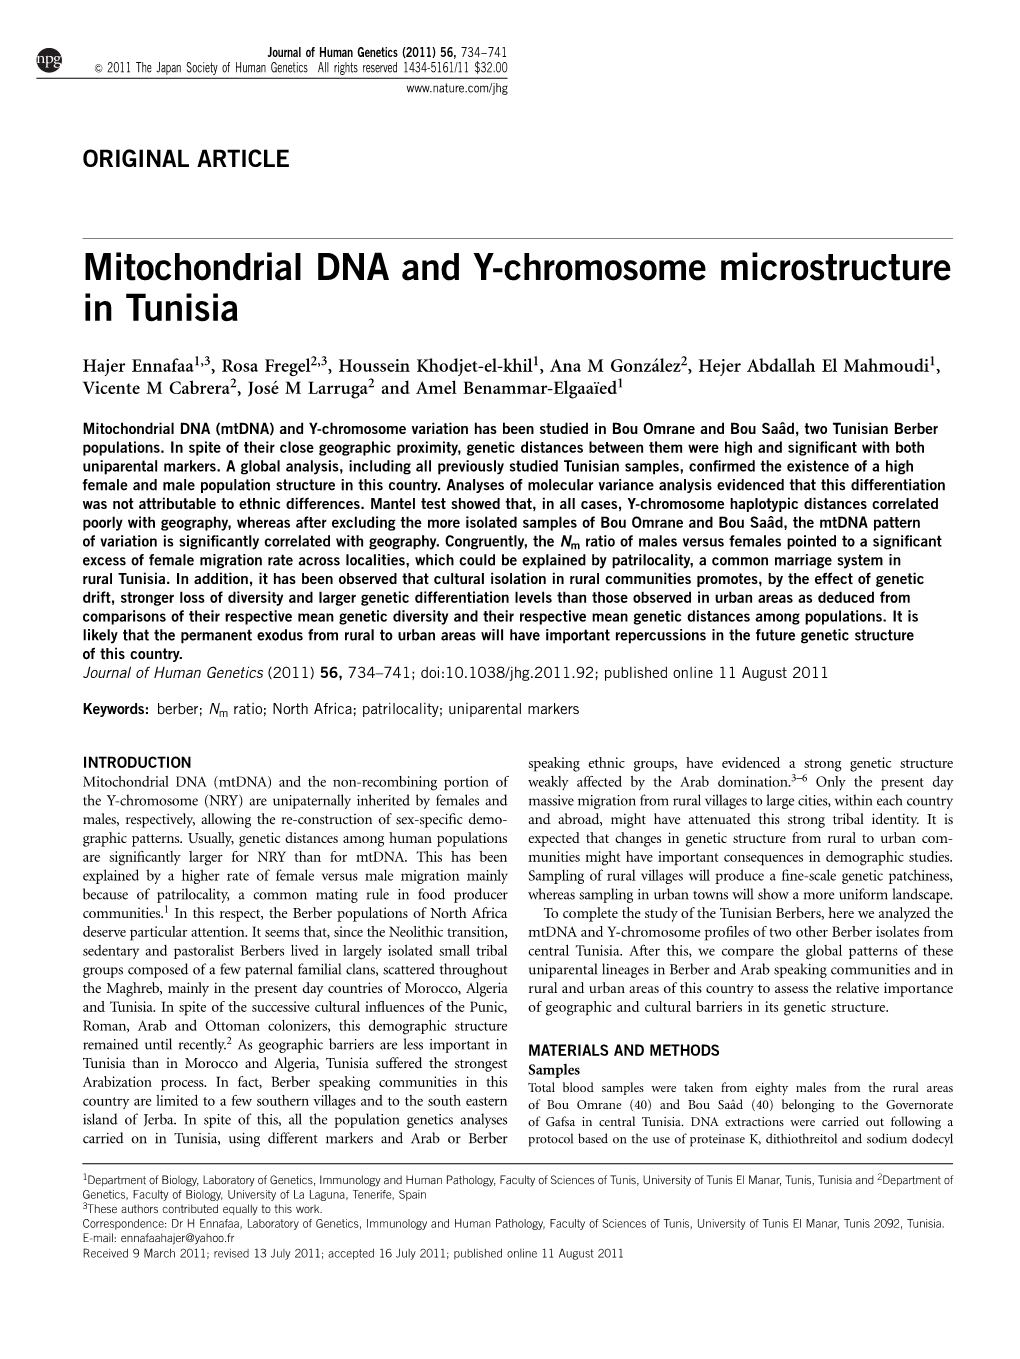 Mitochondrial DNA and Y-Chromosome Microstructure in Tunisia